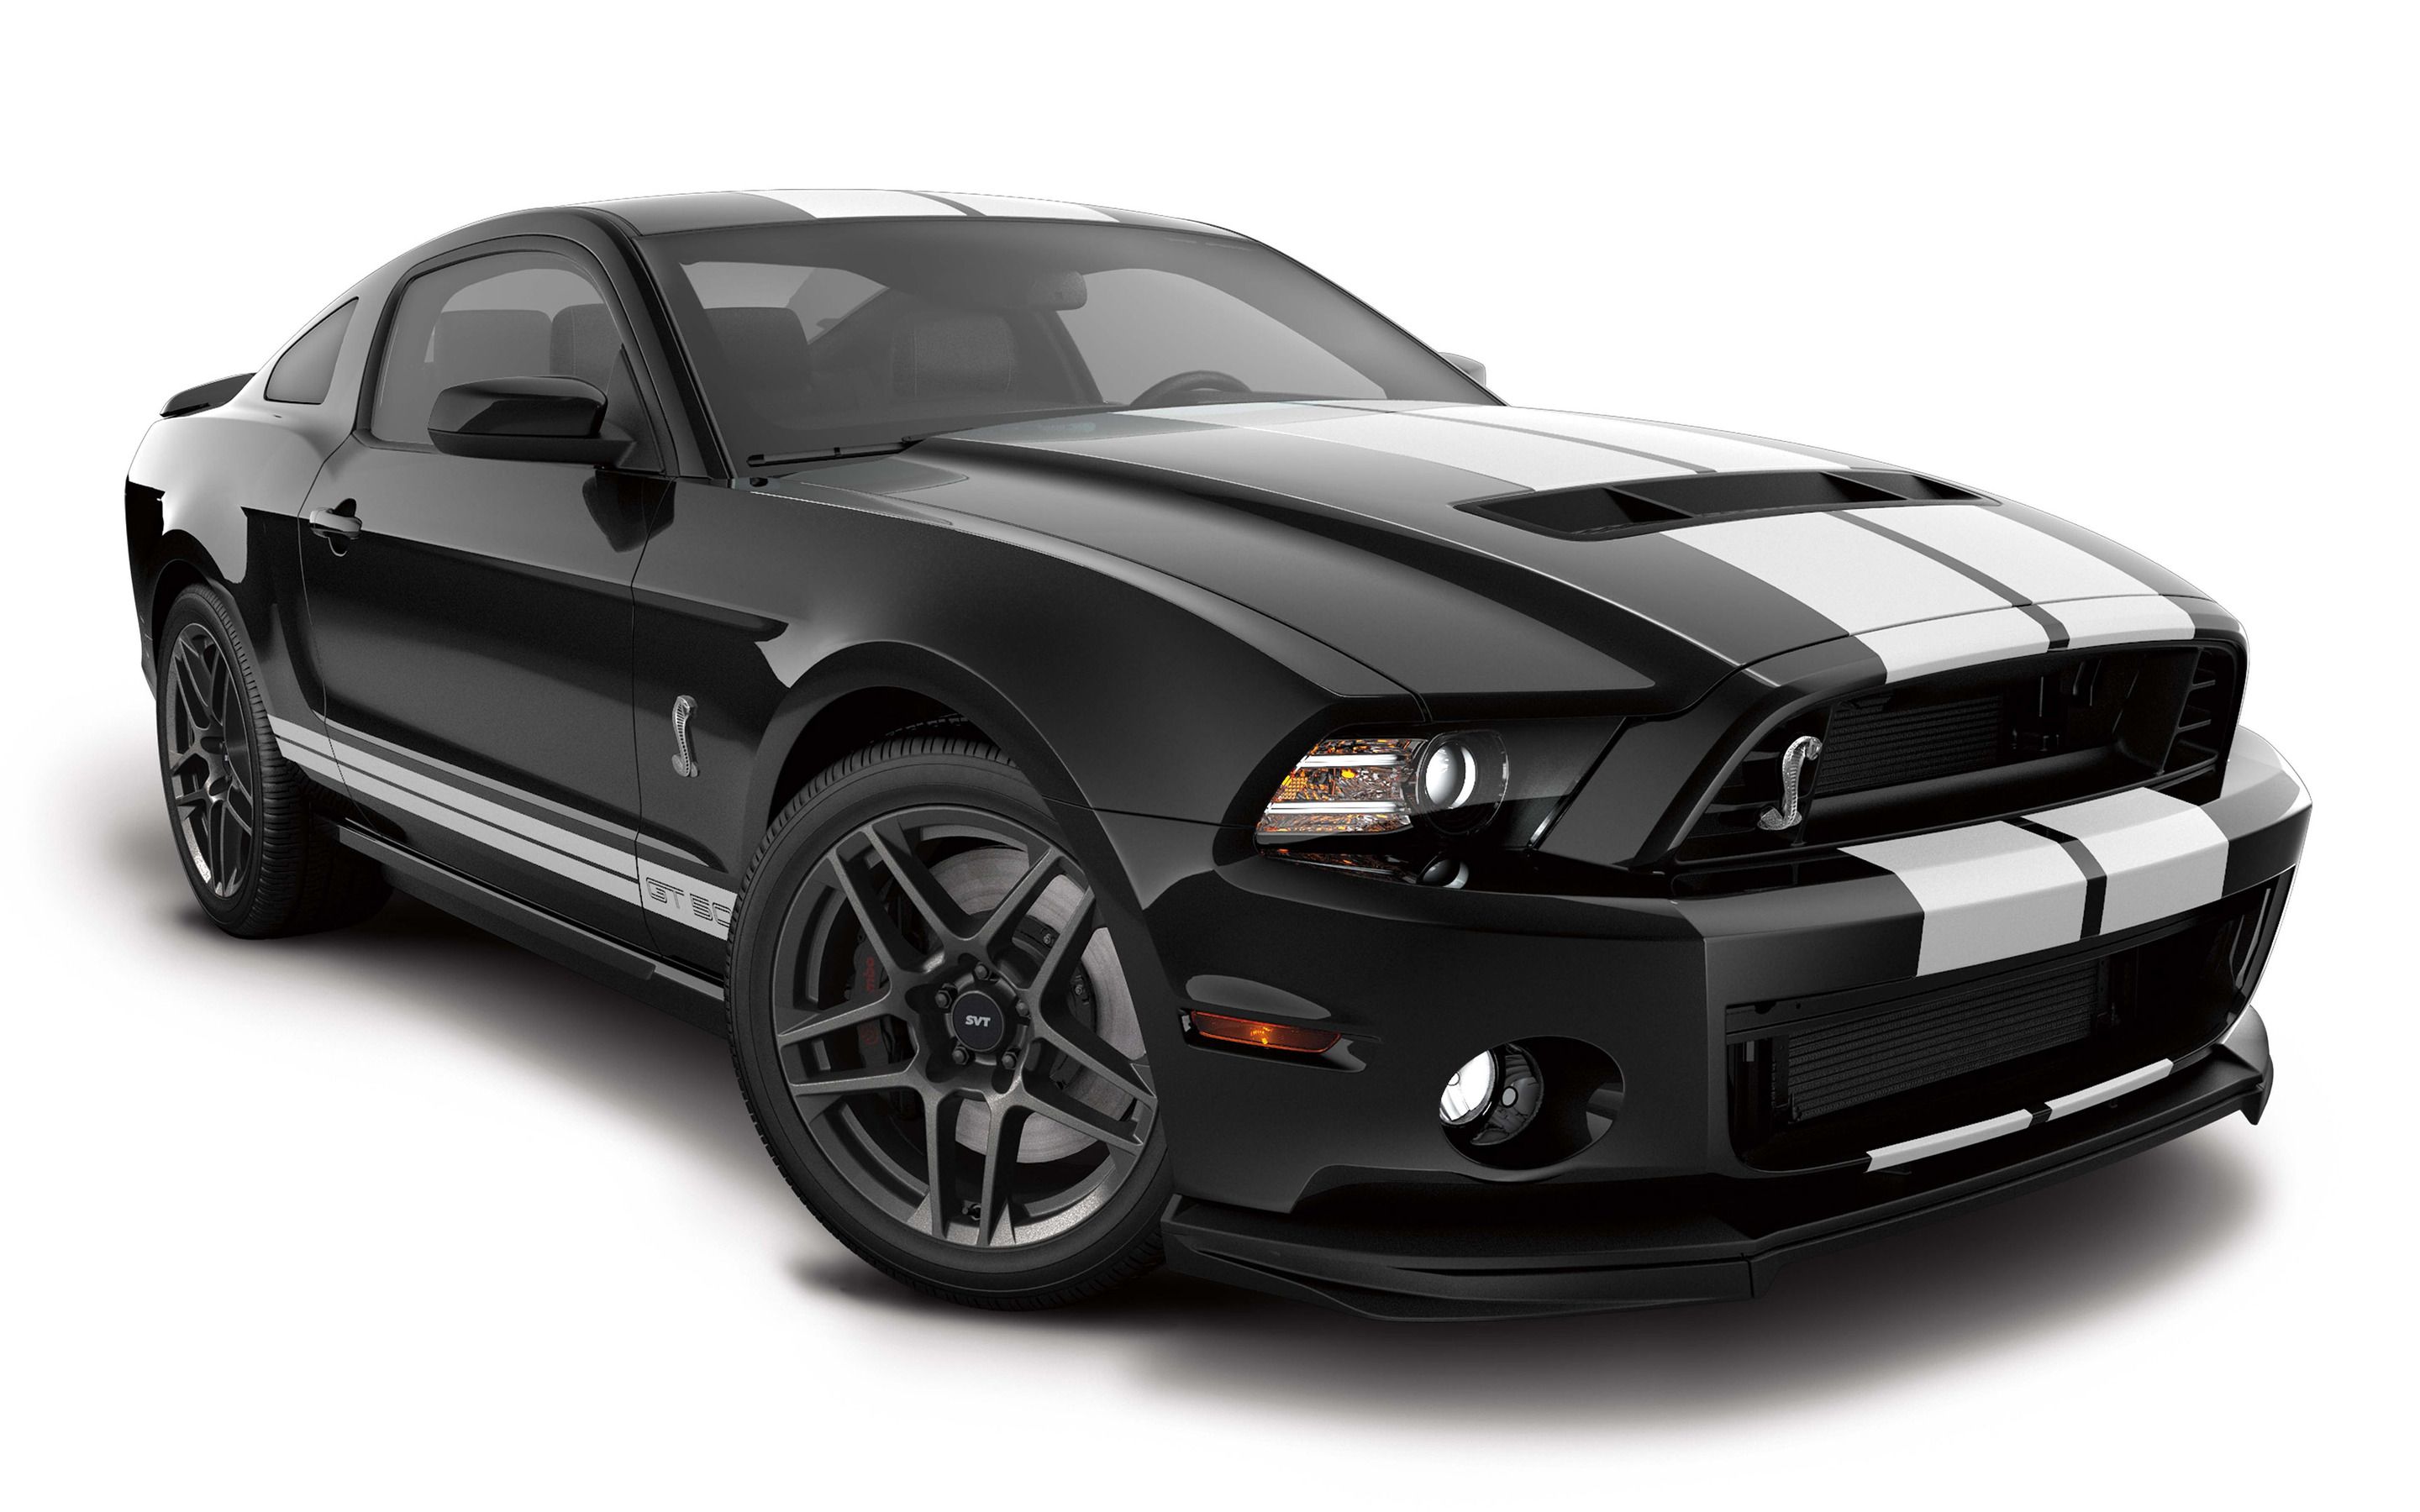 Ford Mustang Shelby GT 500 Wallpaper #32551